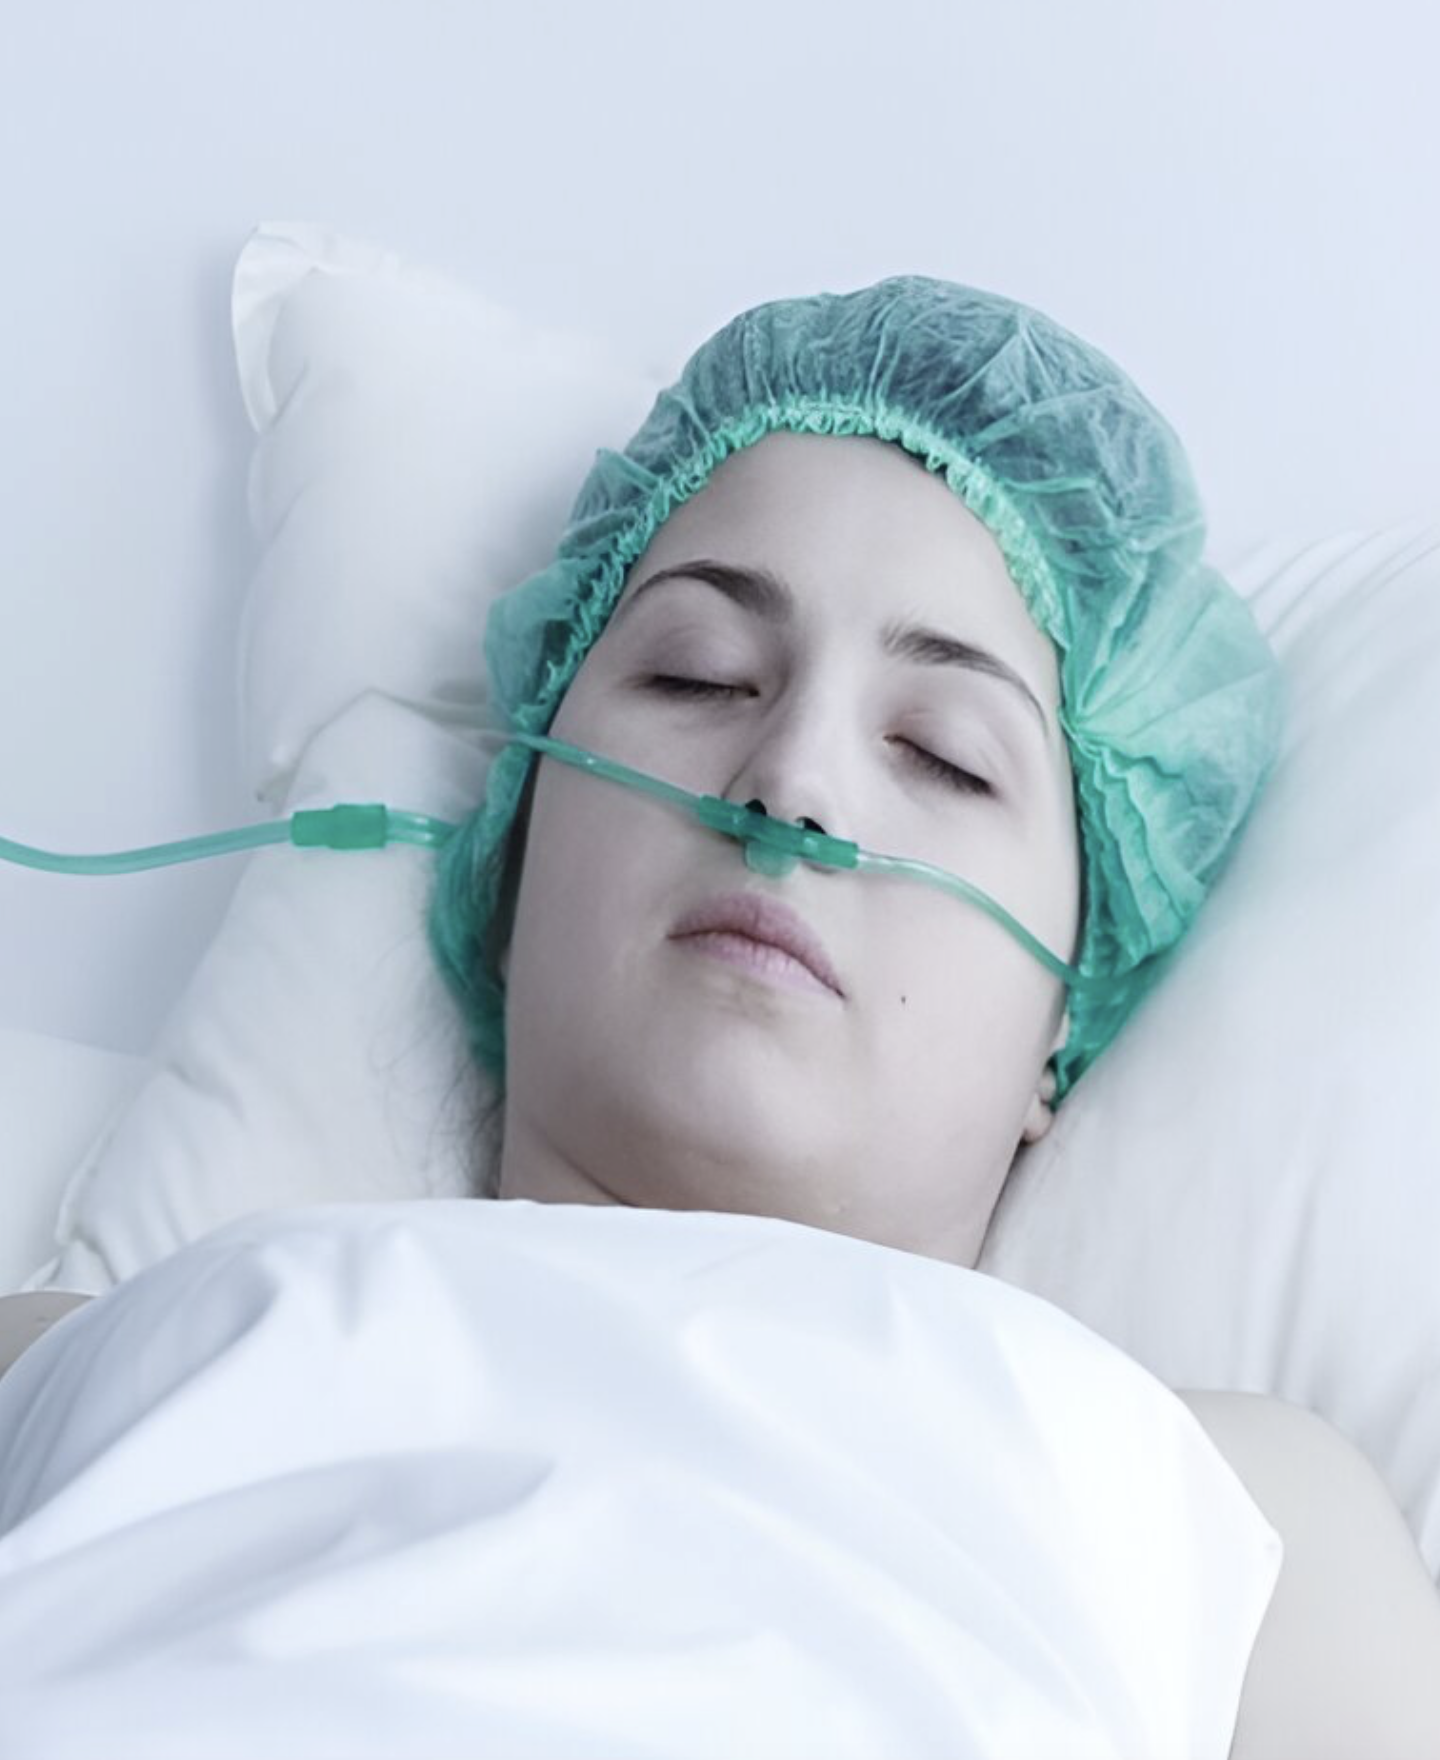 Coma Due to Poisoning: Caution Urged in Intubation